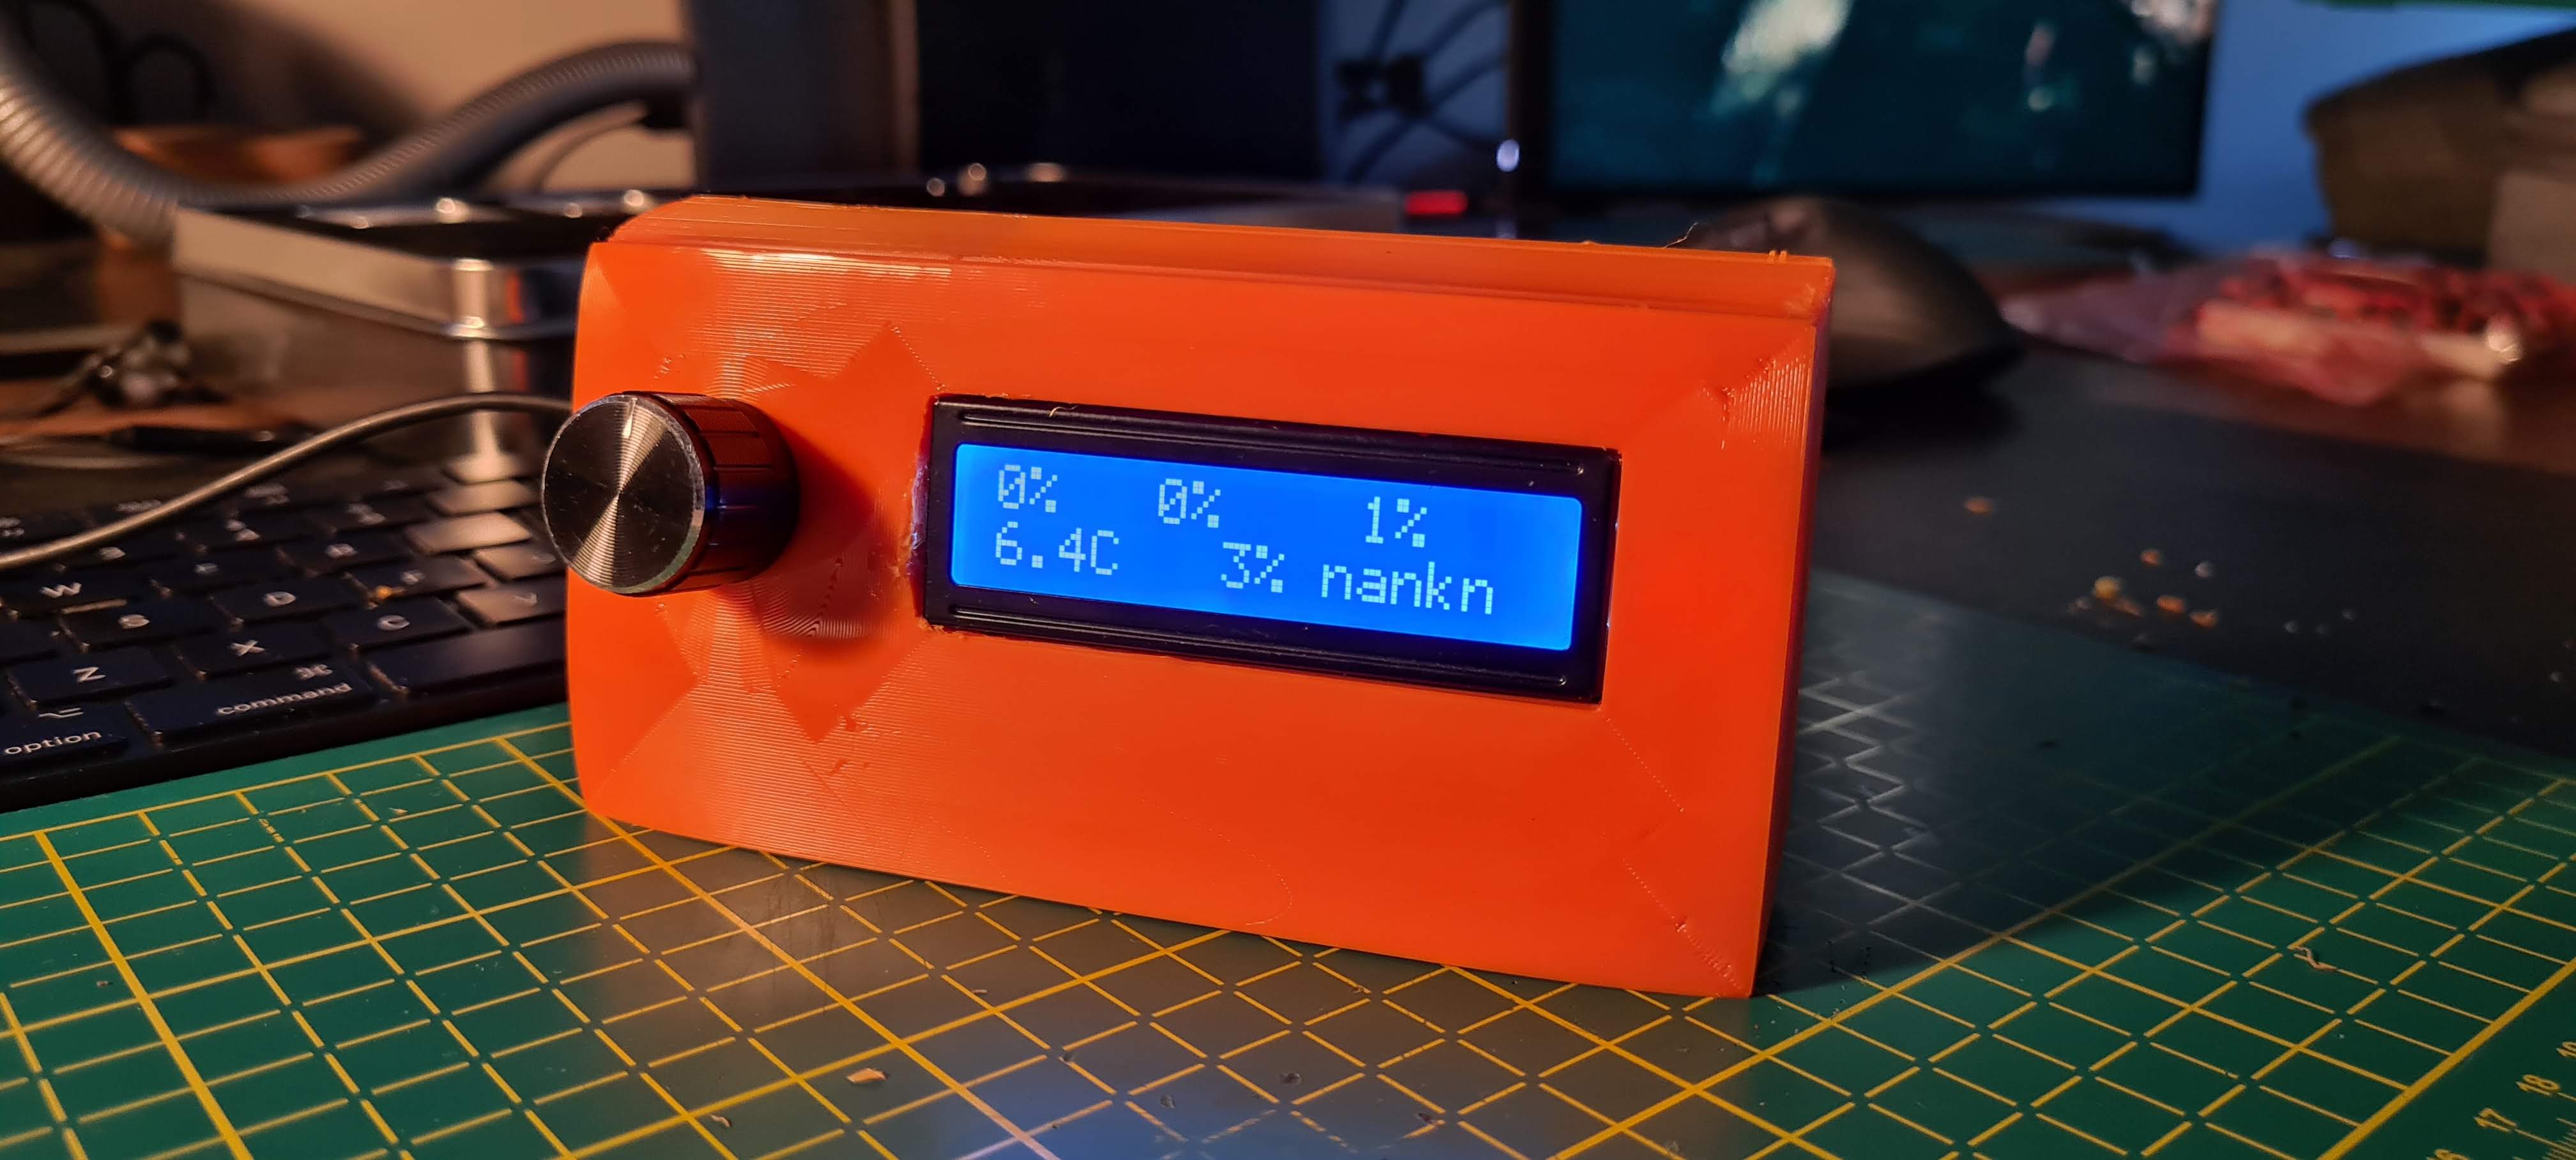 Printing out multiple values on the prototype